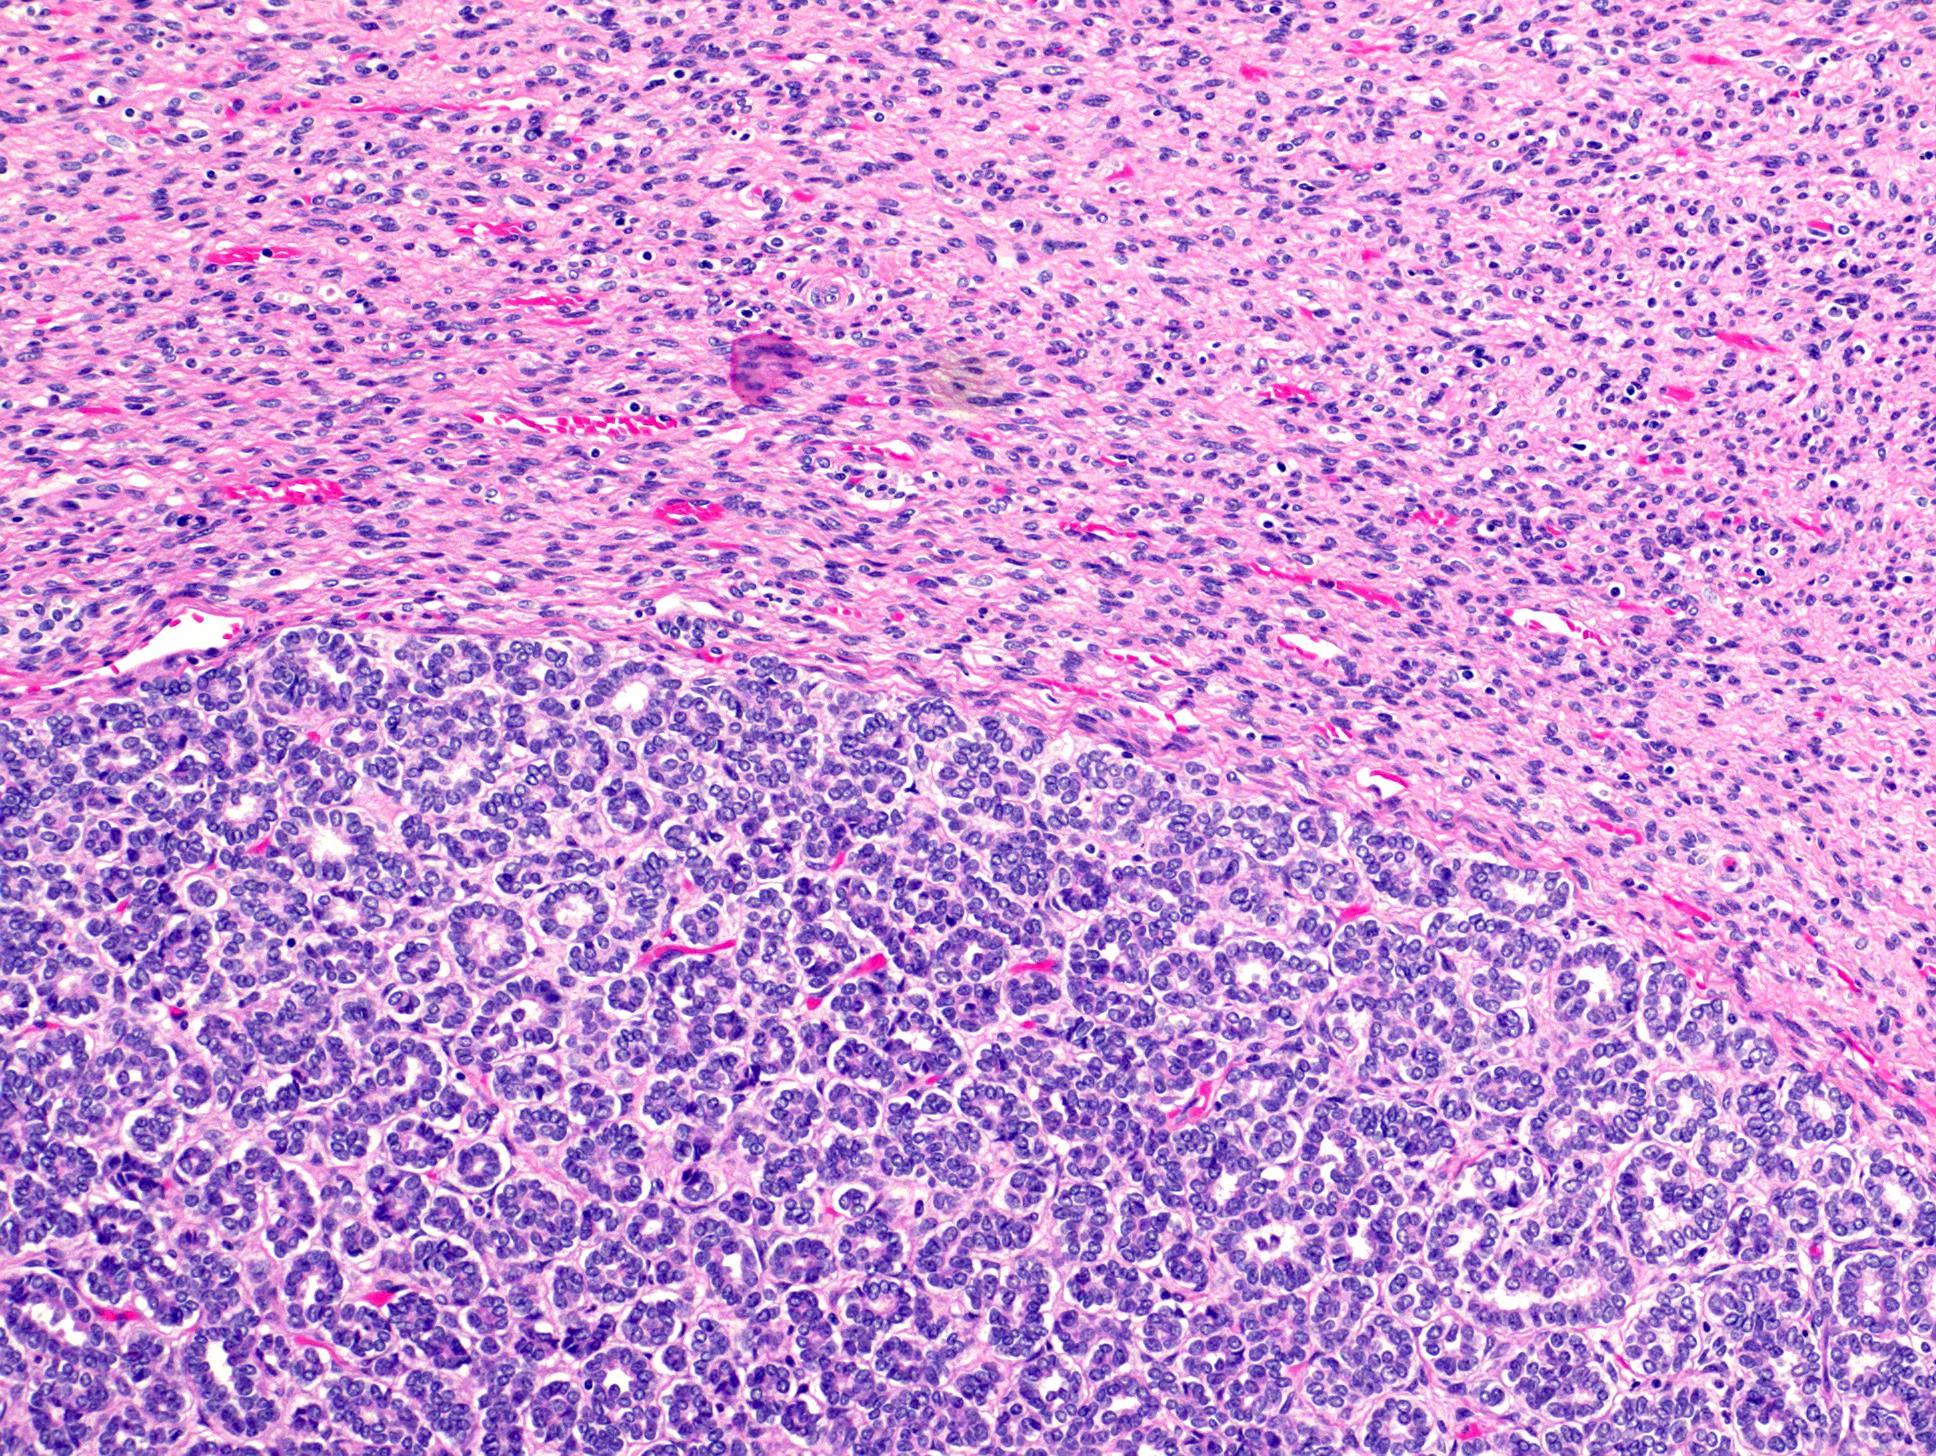 Biphasic tumor with epithelial and stromal components